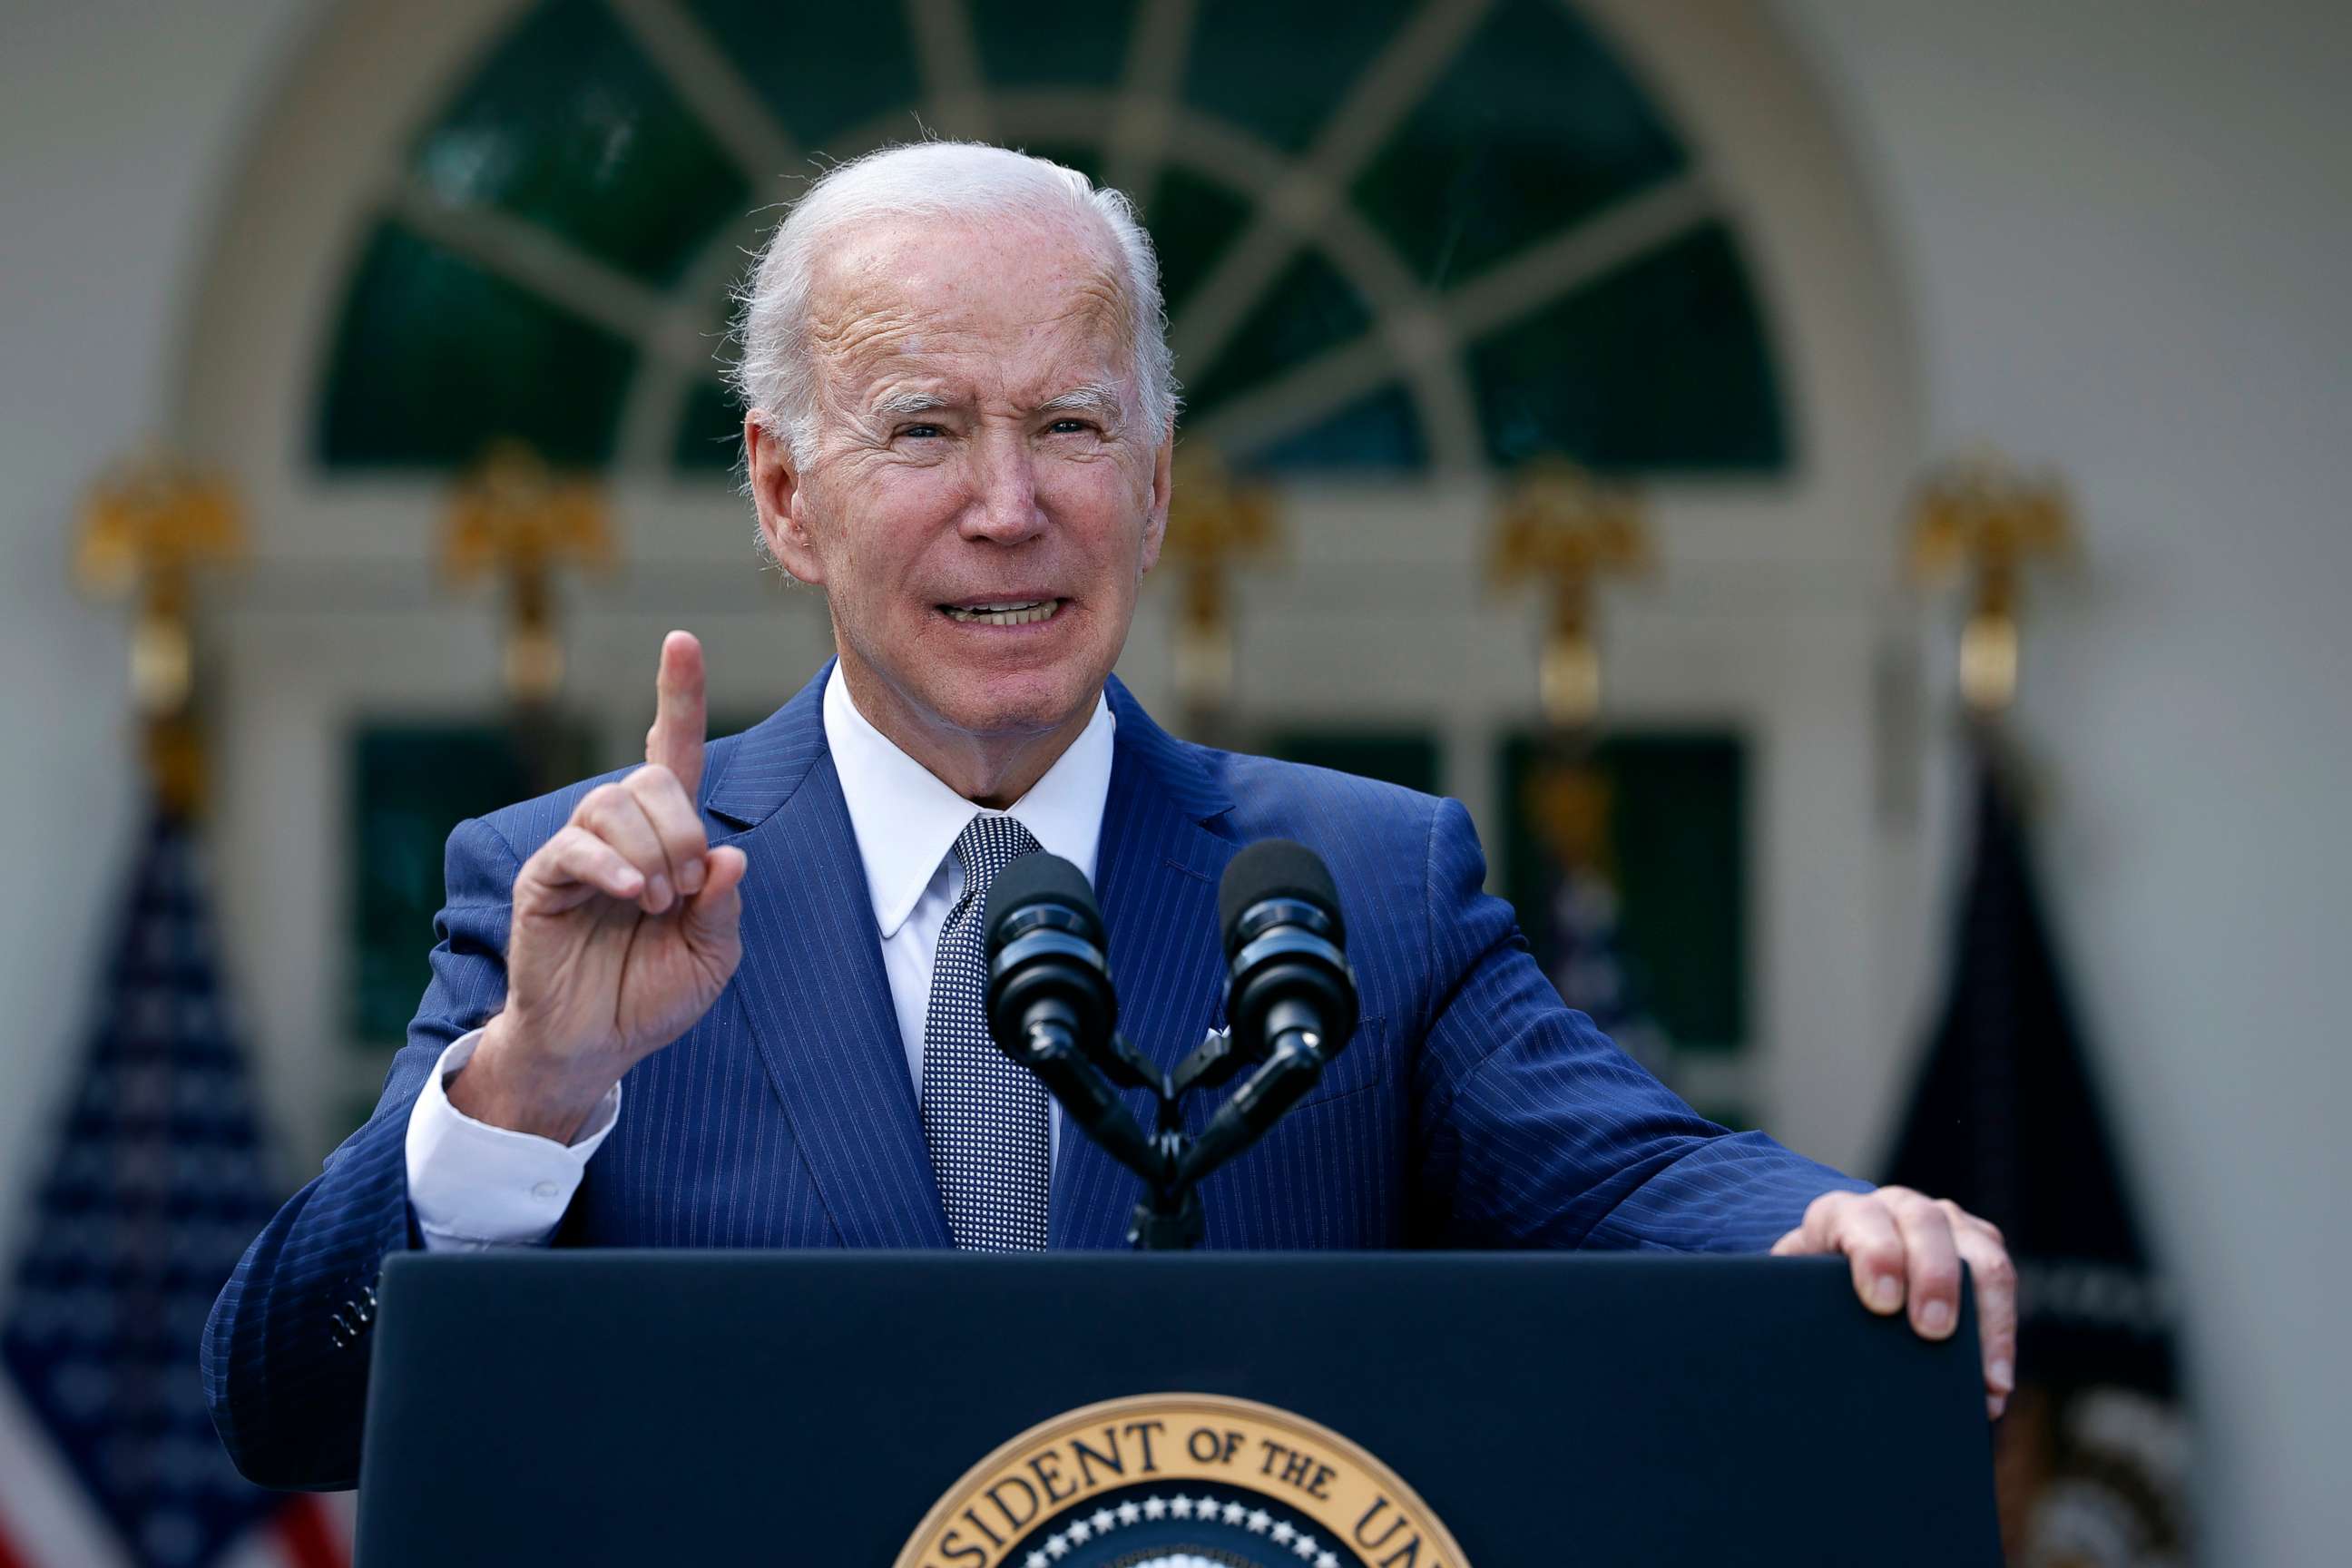 PHOTO: President Joe Biden delivers remarks about lowering health care costs in the Rose Garden at the White House on September 27, 2022 in Washington, DC.